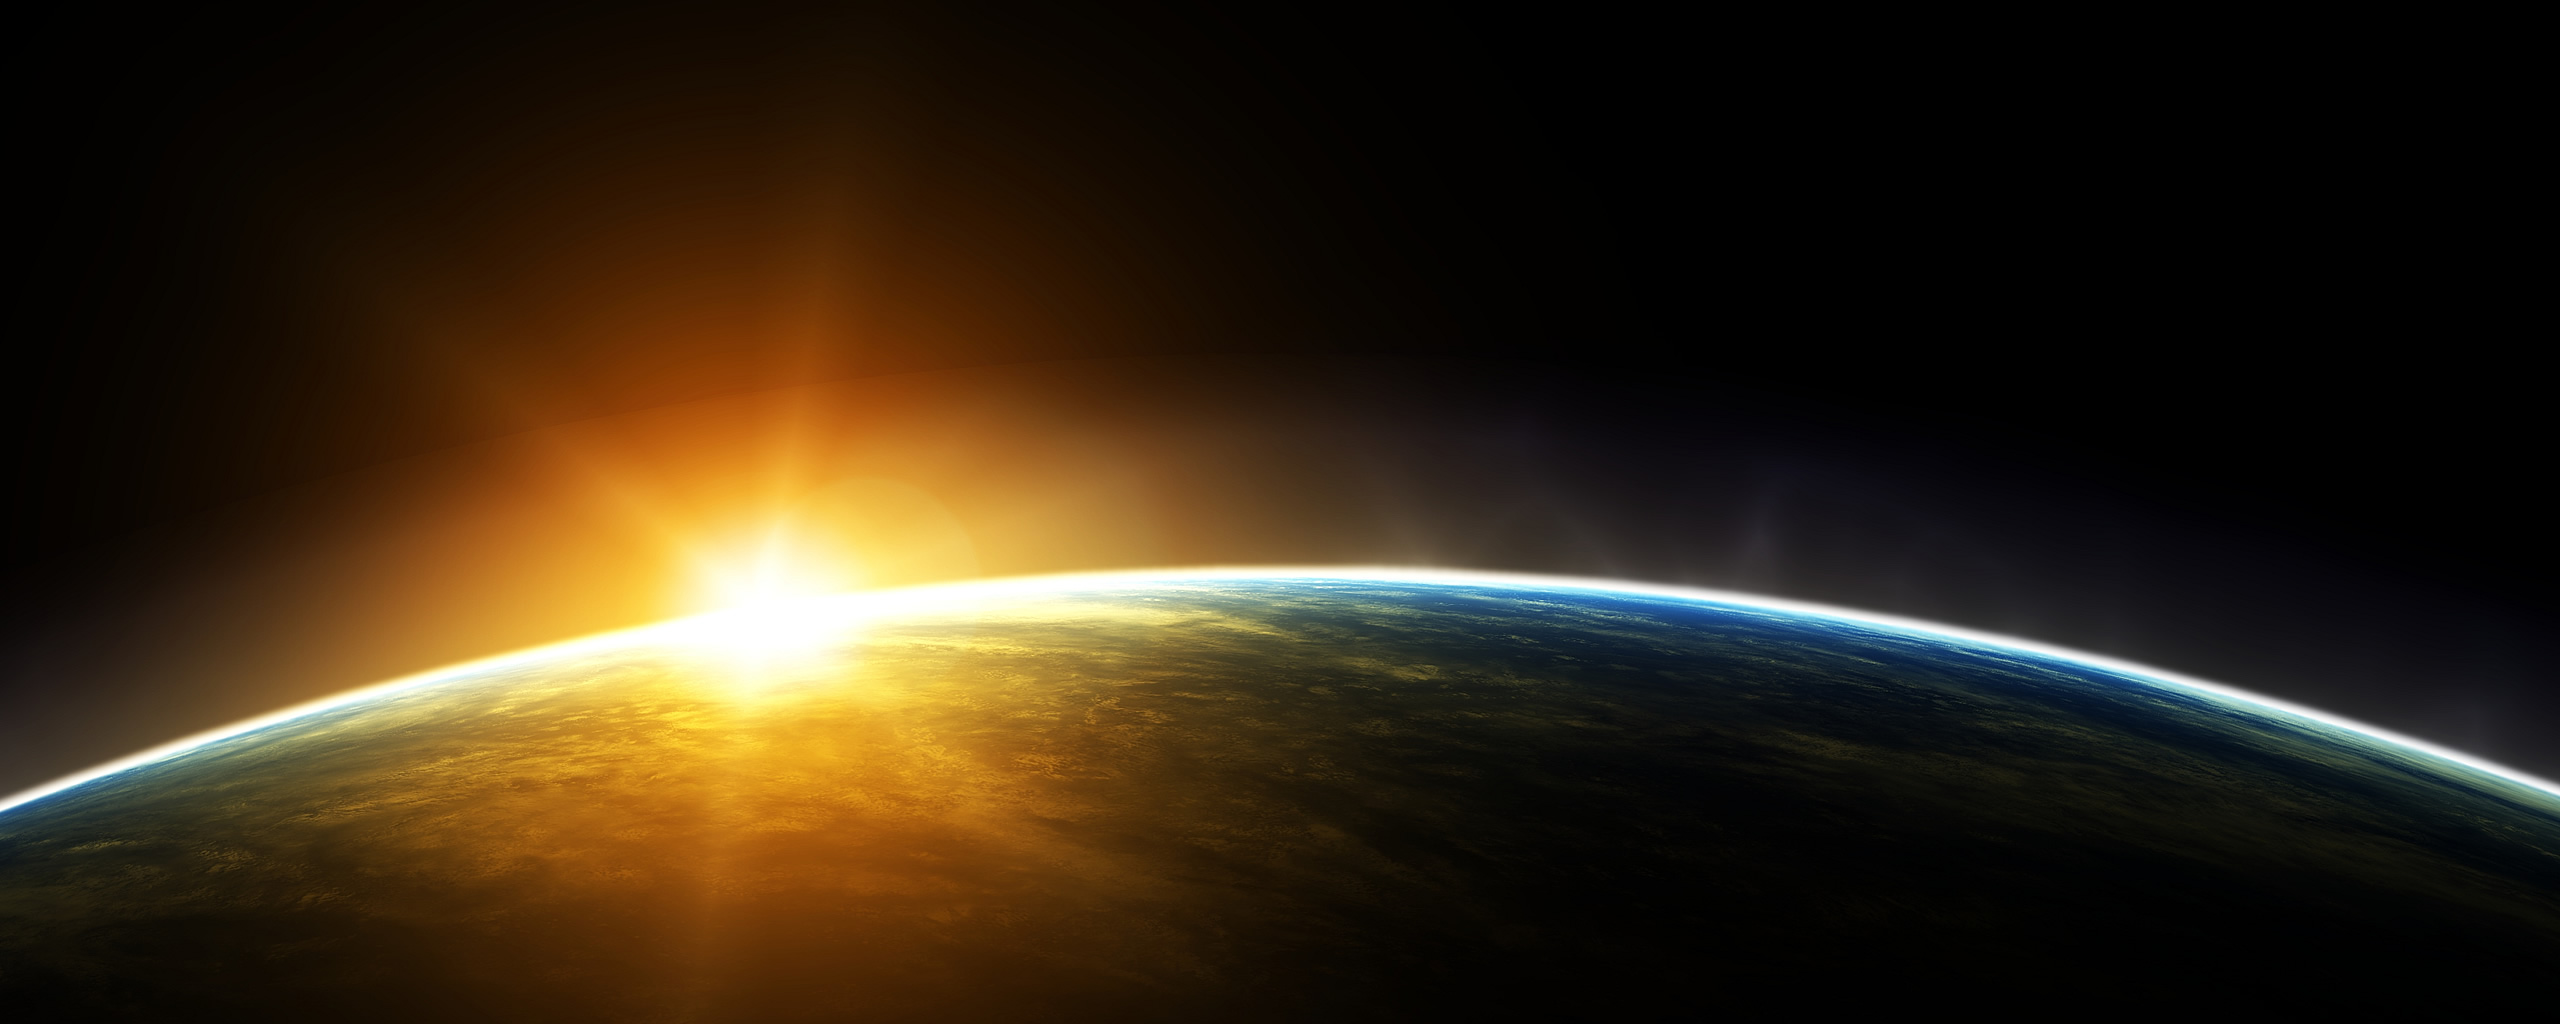 space, from space, sunrise, earth